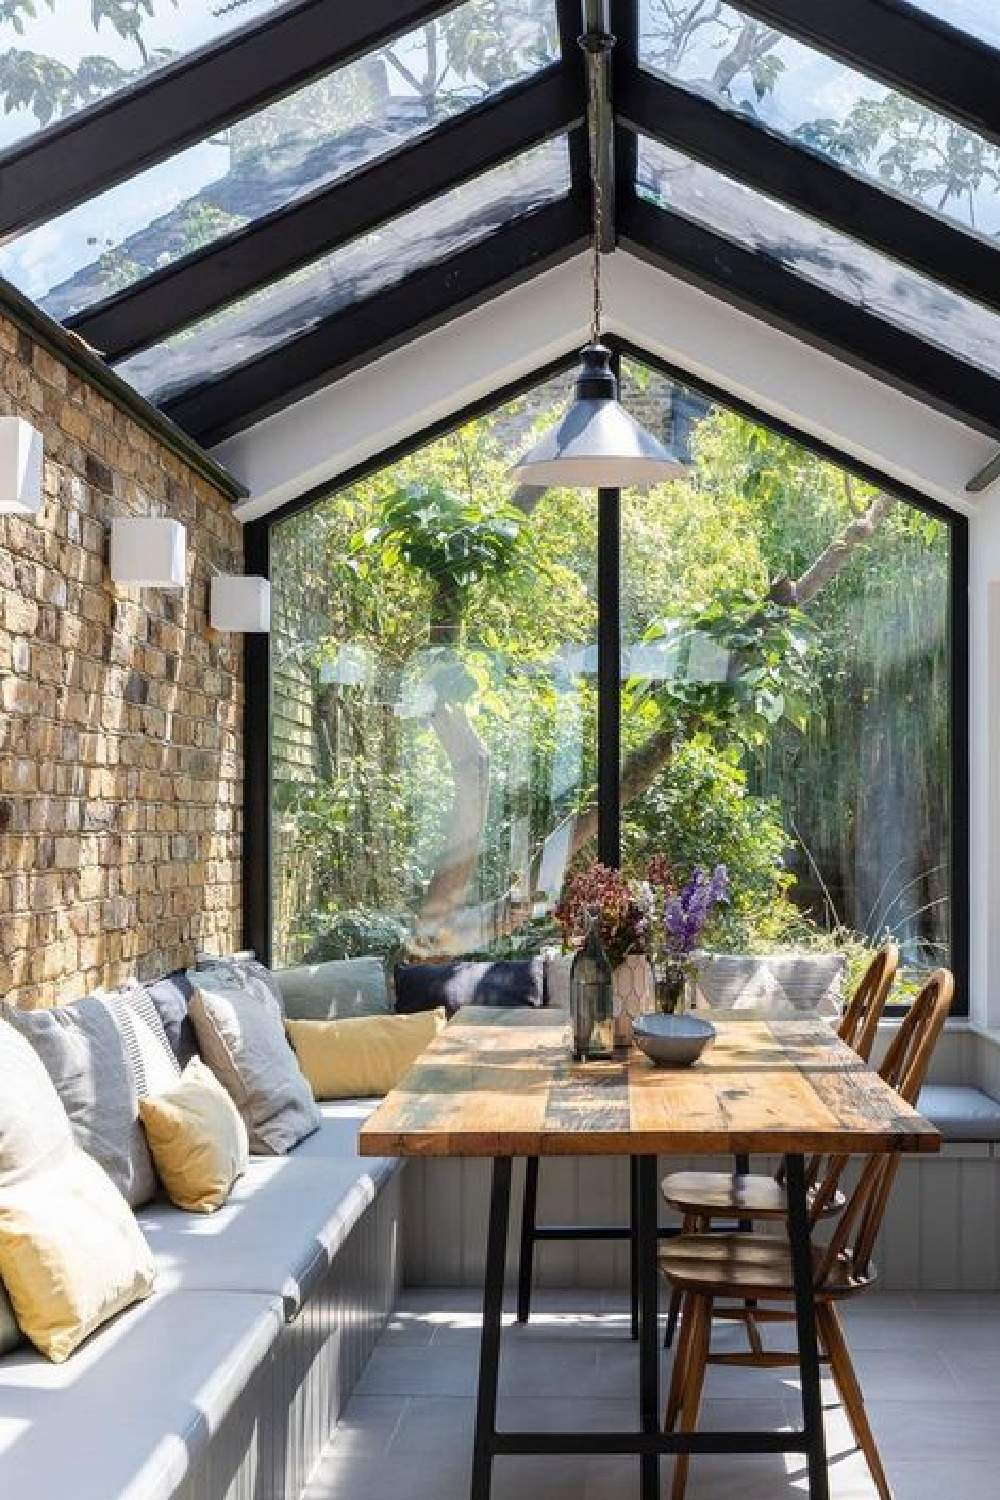 English country breakfast nook with glass roof, brick wall and built-in banquettes - Imperfect Interiors. #breakfastnook #europeancountry #interiordesign